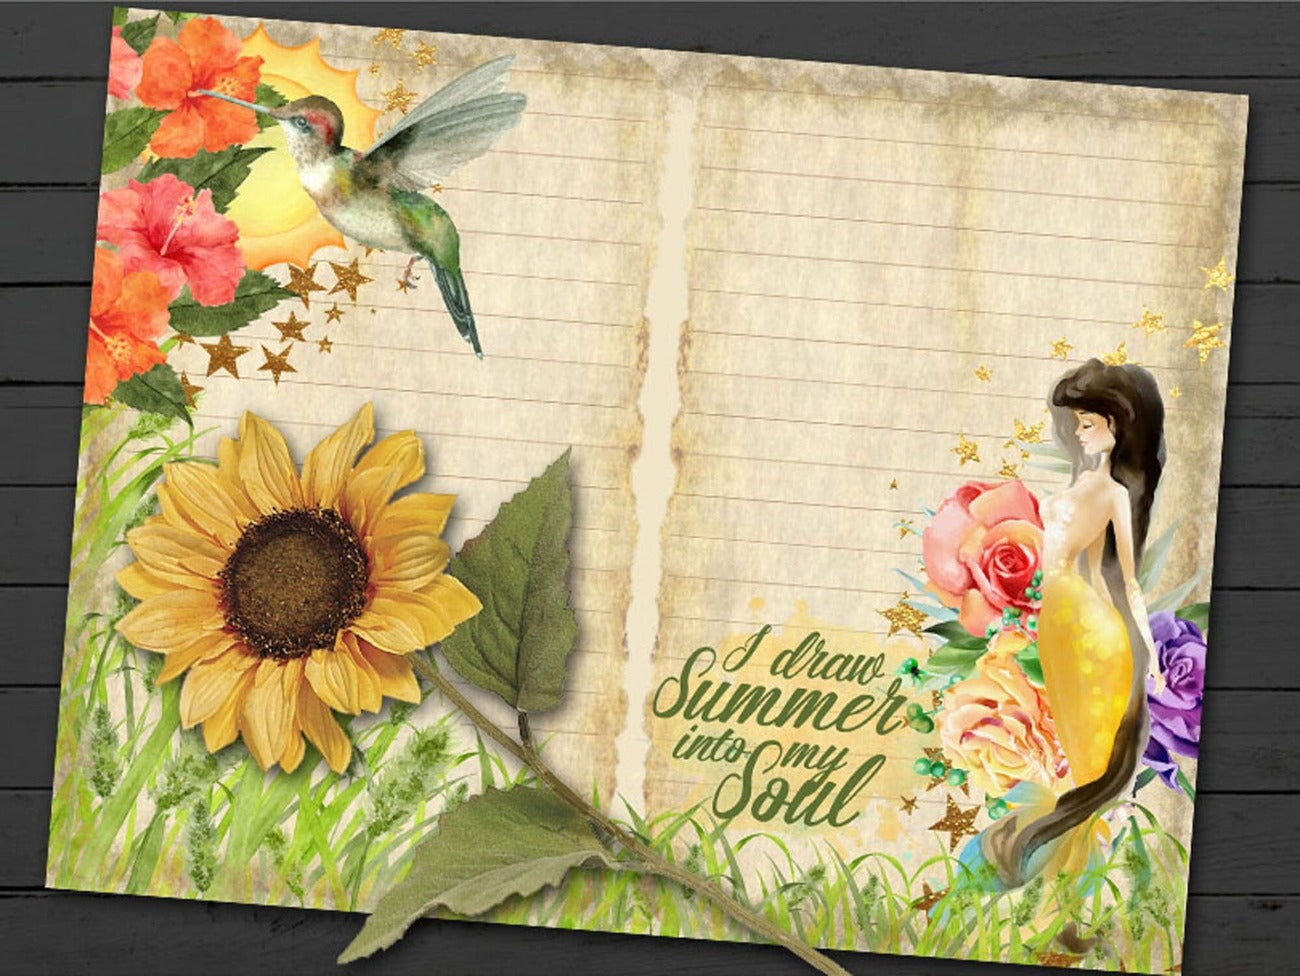 Closeup image of double pages with orange tropical flowers, hummingbird, gold stars, grass bottom border image and fairy surrounded with roses.